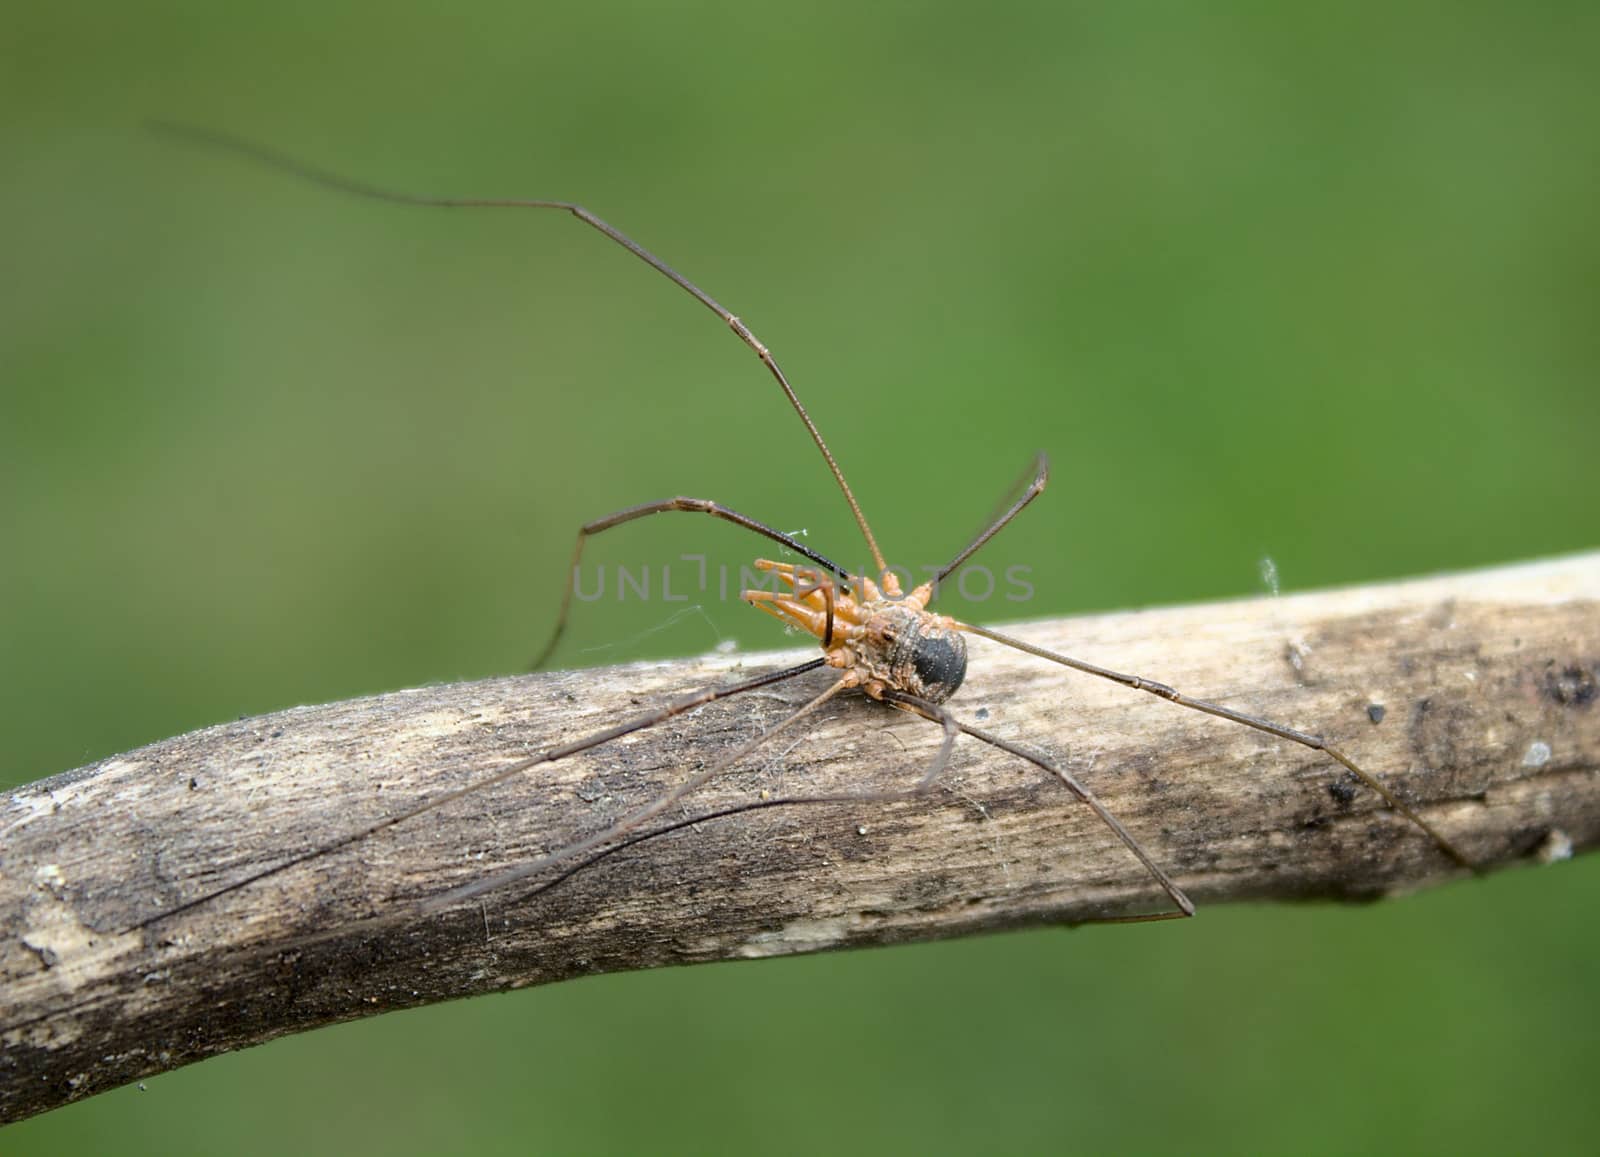 The picture shows a harvestman on a tree trunk